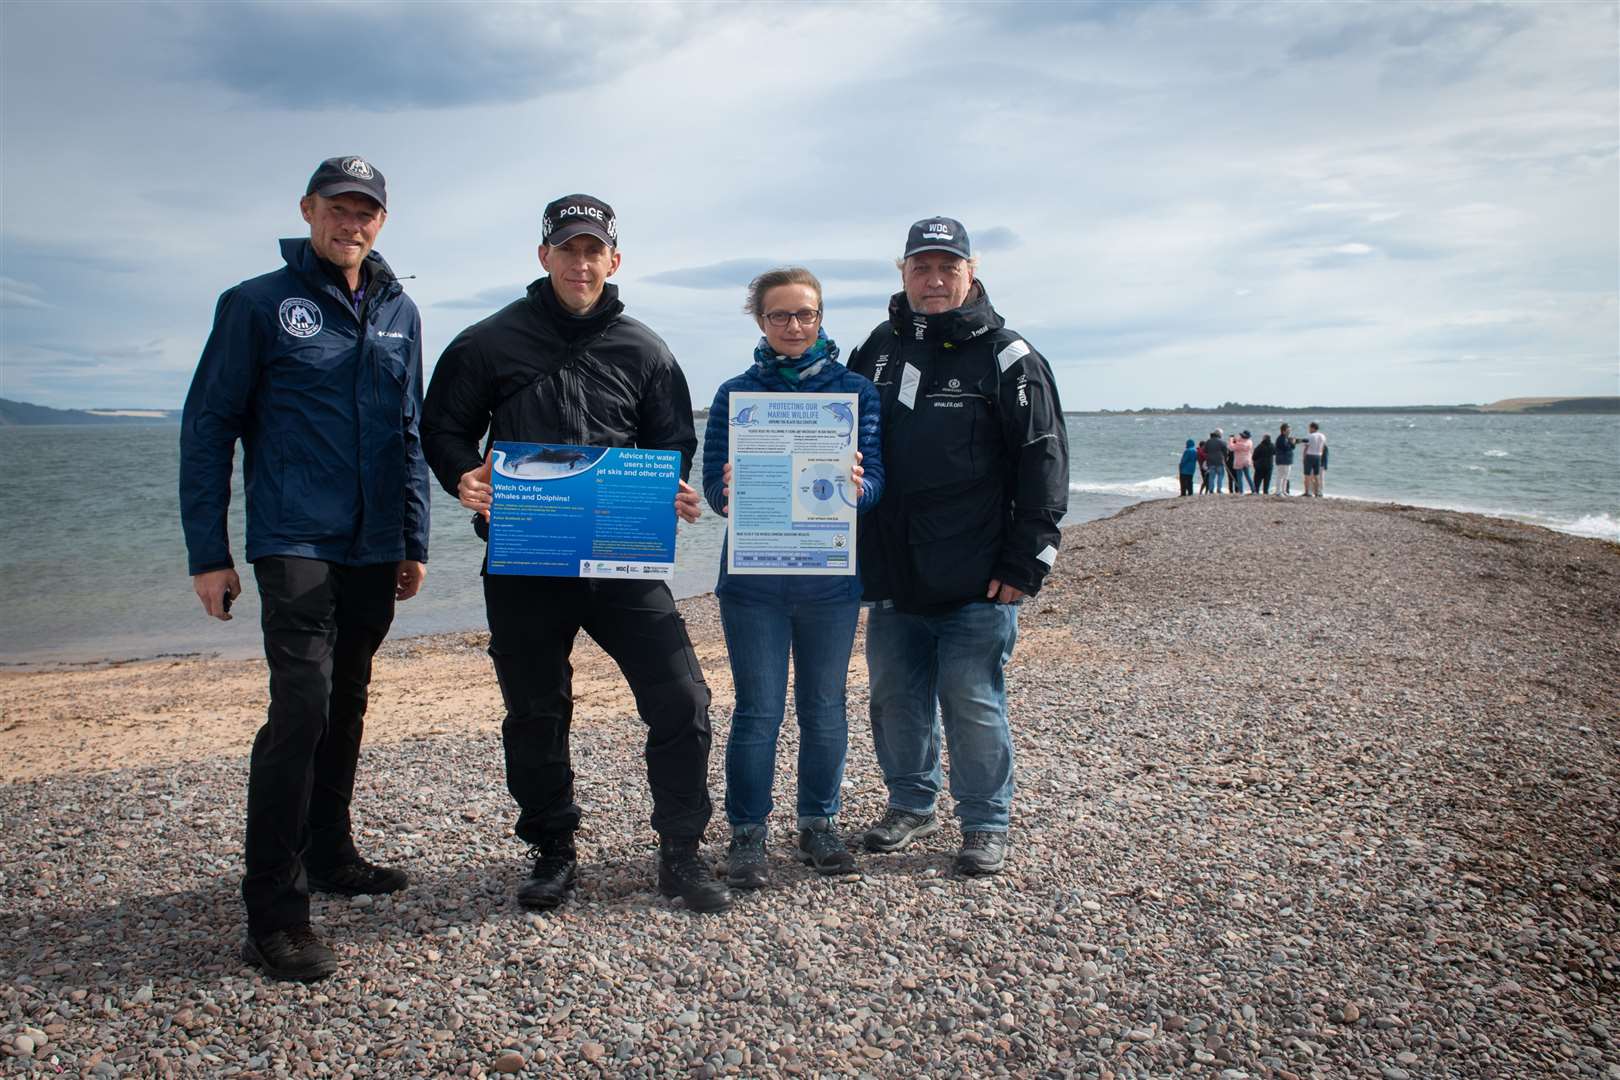 Kenneth Adam, The Highland Council Ranger Service; Dan Sutherand, Highland & Islands wildlife liaison officer;Sarah Macdonald-Taylor, community councillor and Charlie Phillips, field officer for Whale & Dolphin Conservation. Picture: Callum Mackay.